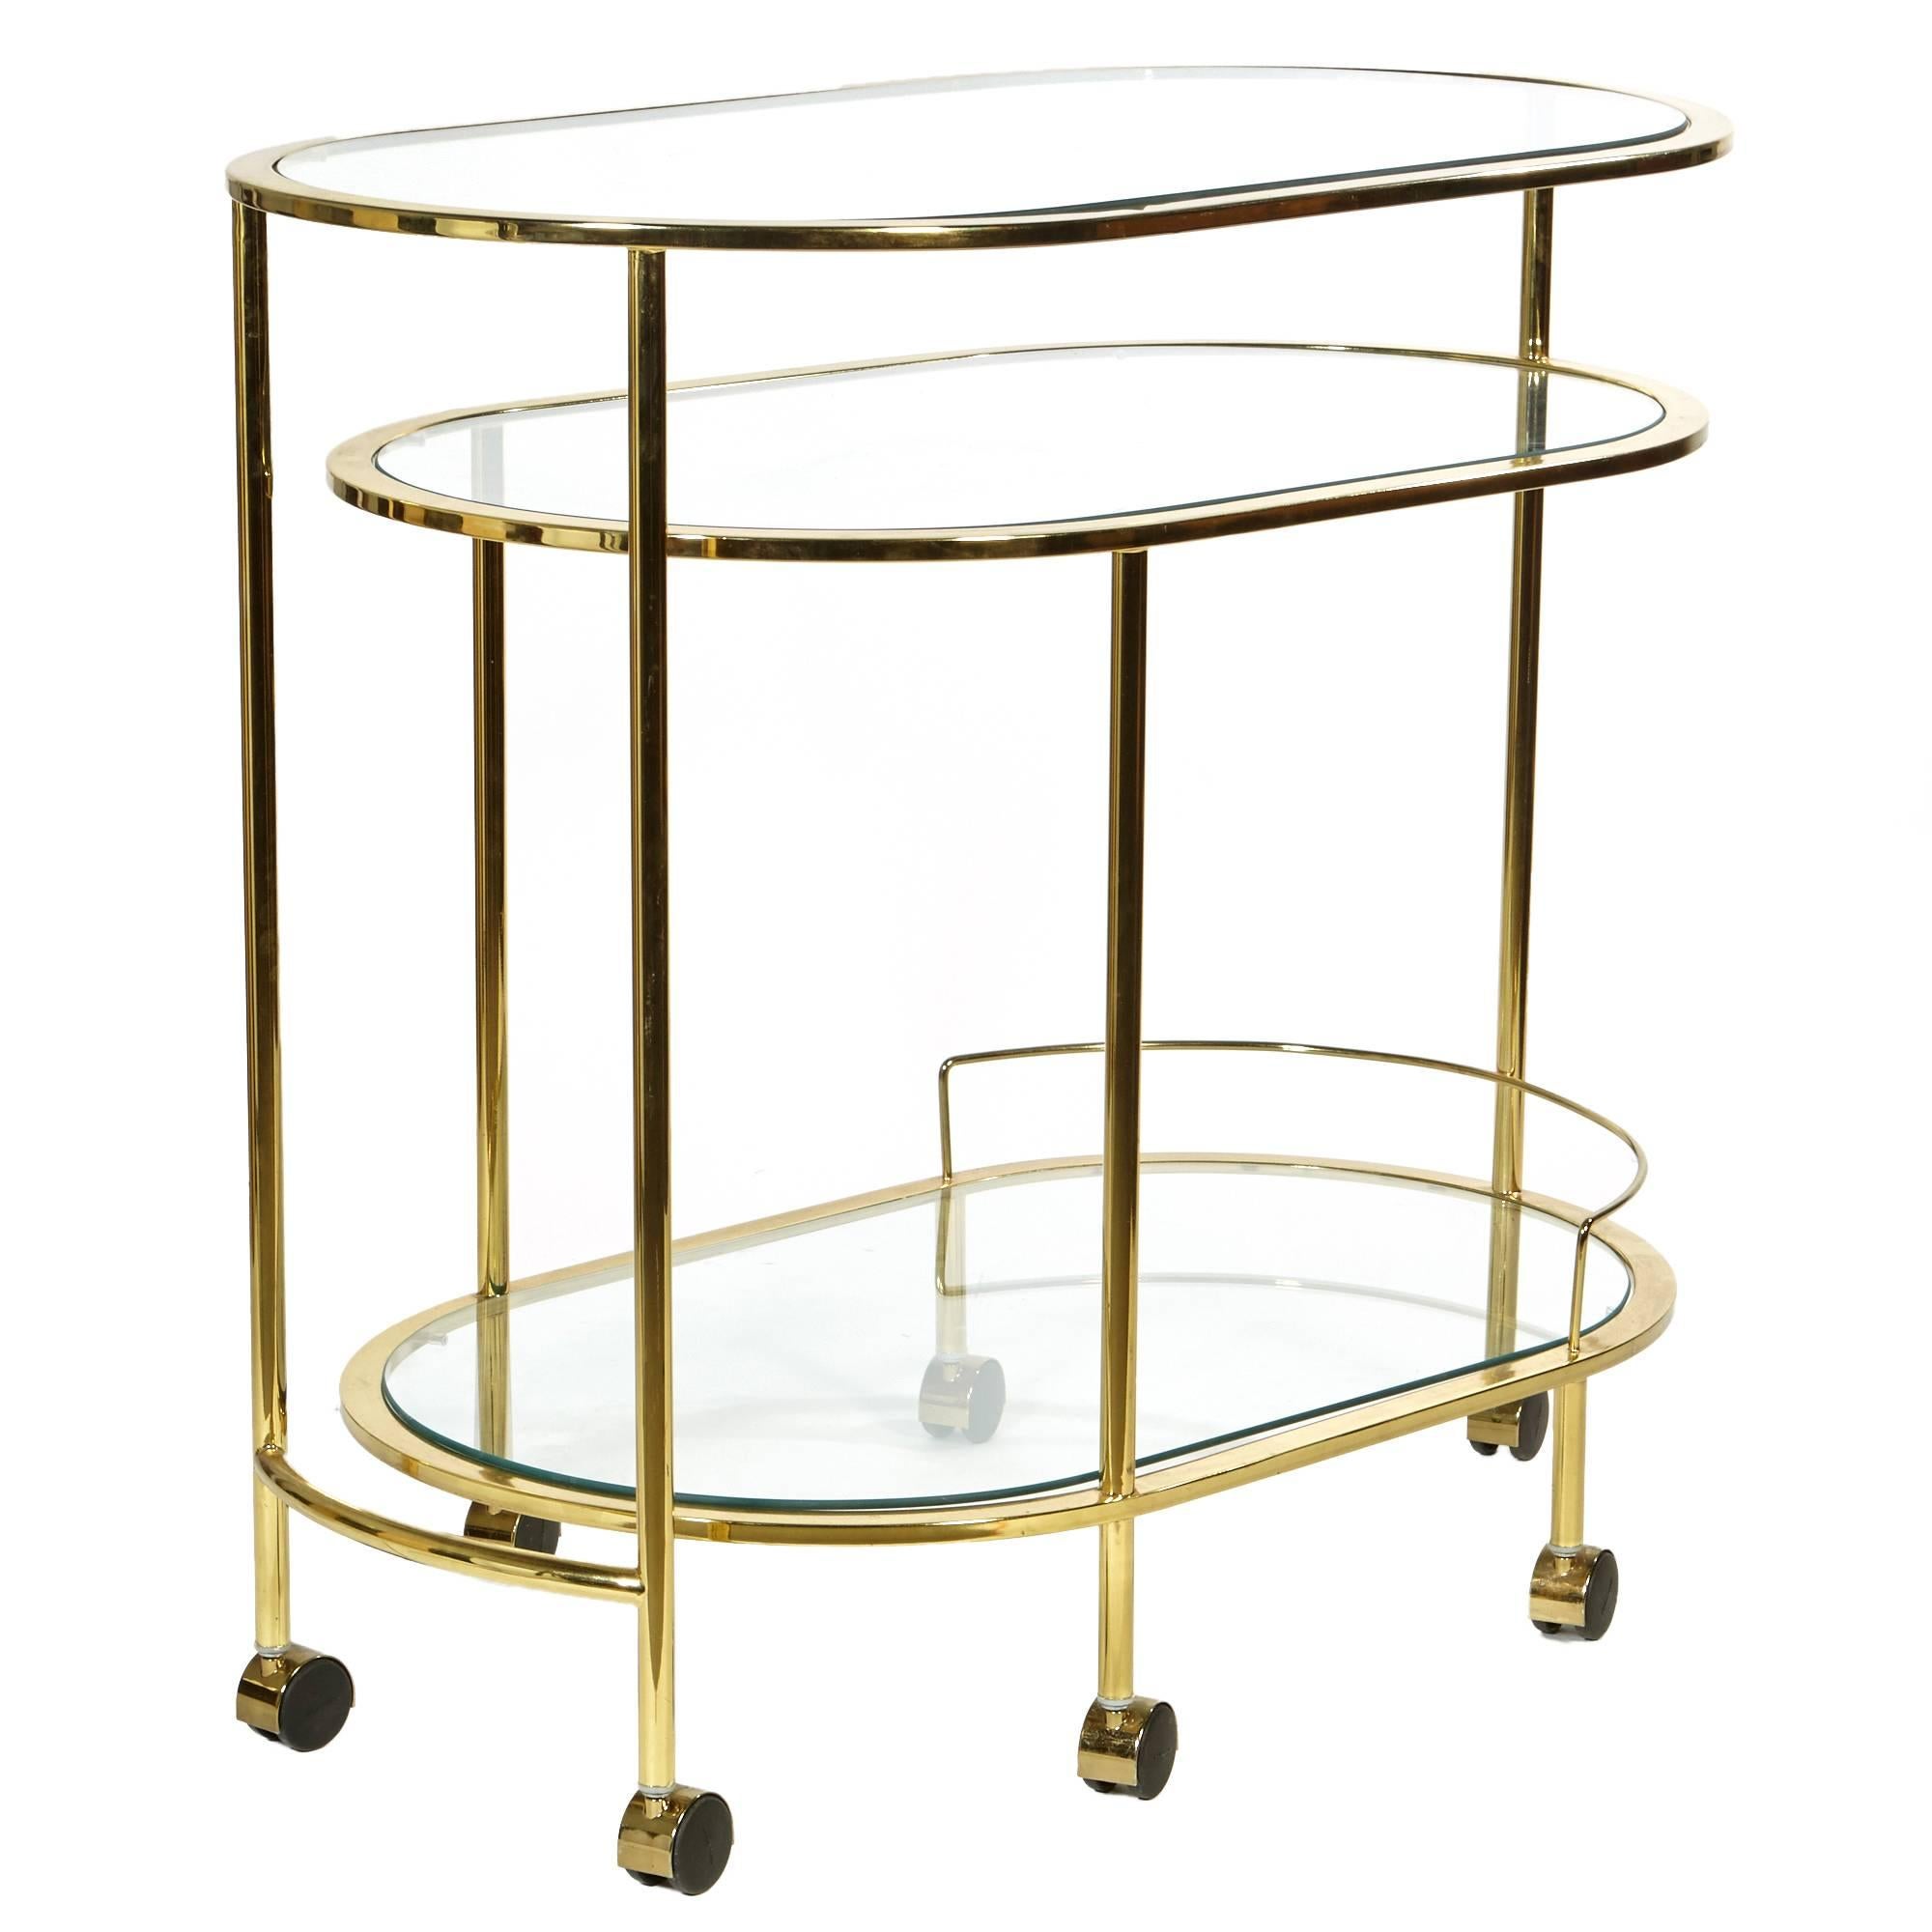 The 1970s swivel brass and glass top rolling serving cart. Bottom section swivels out to create a two-part serving cart. Excellent condition. Fully opened: 70.5